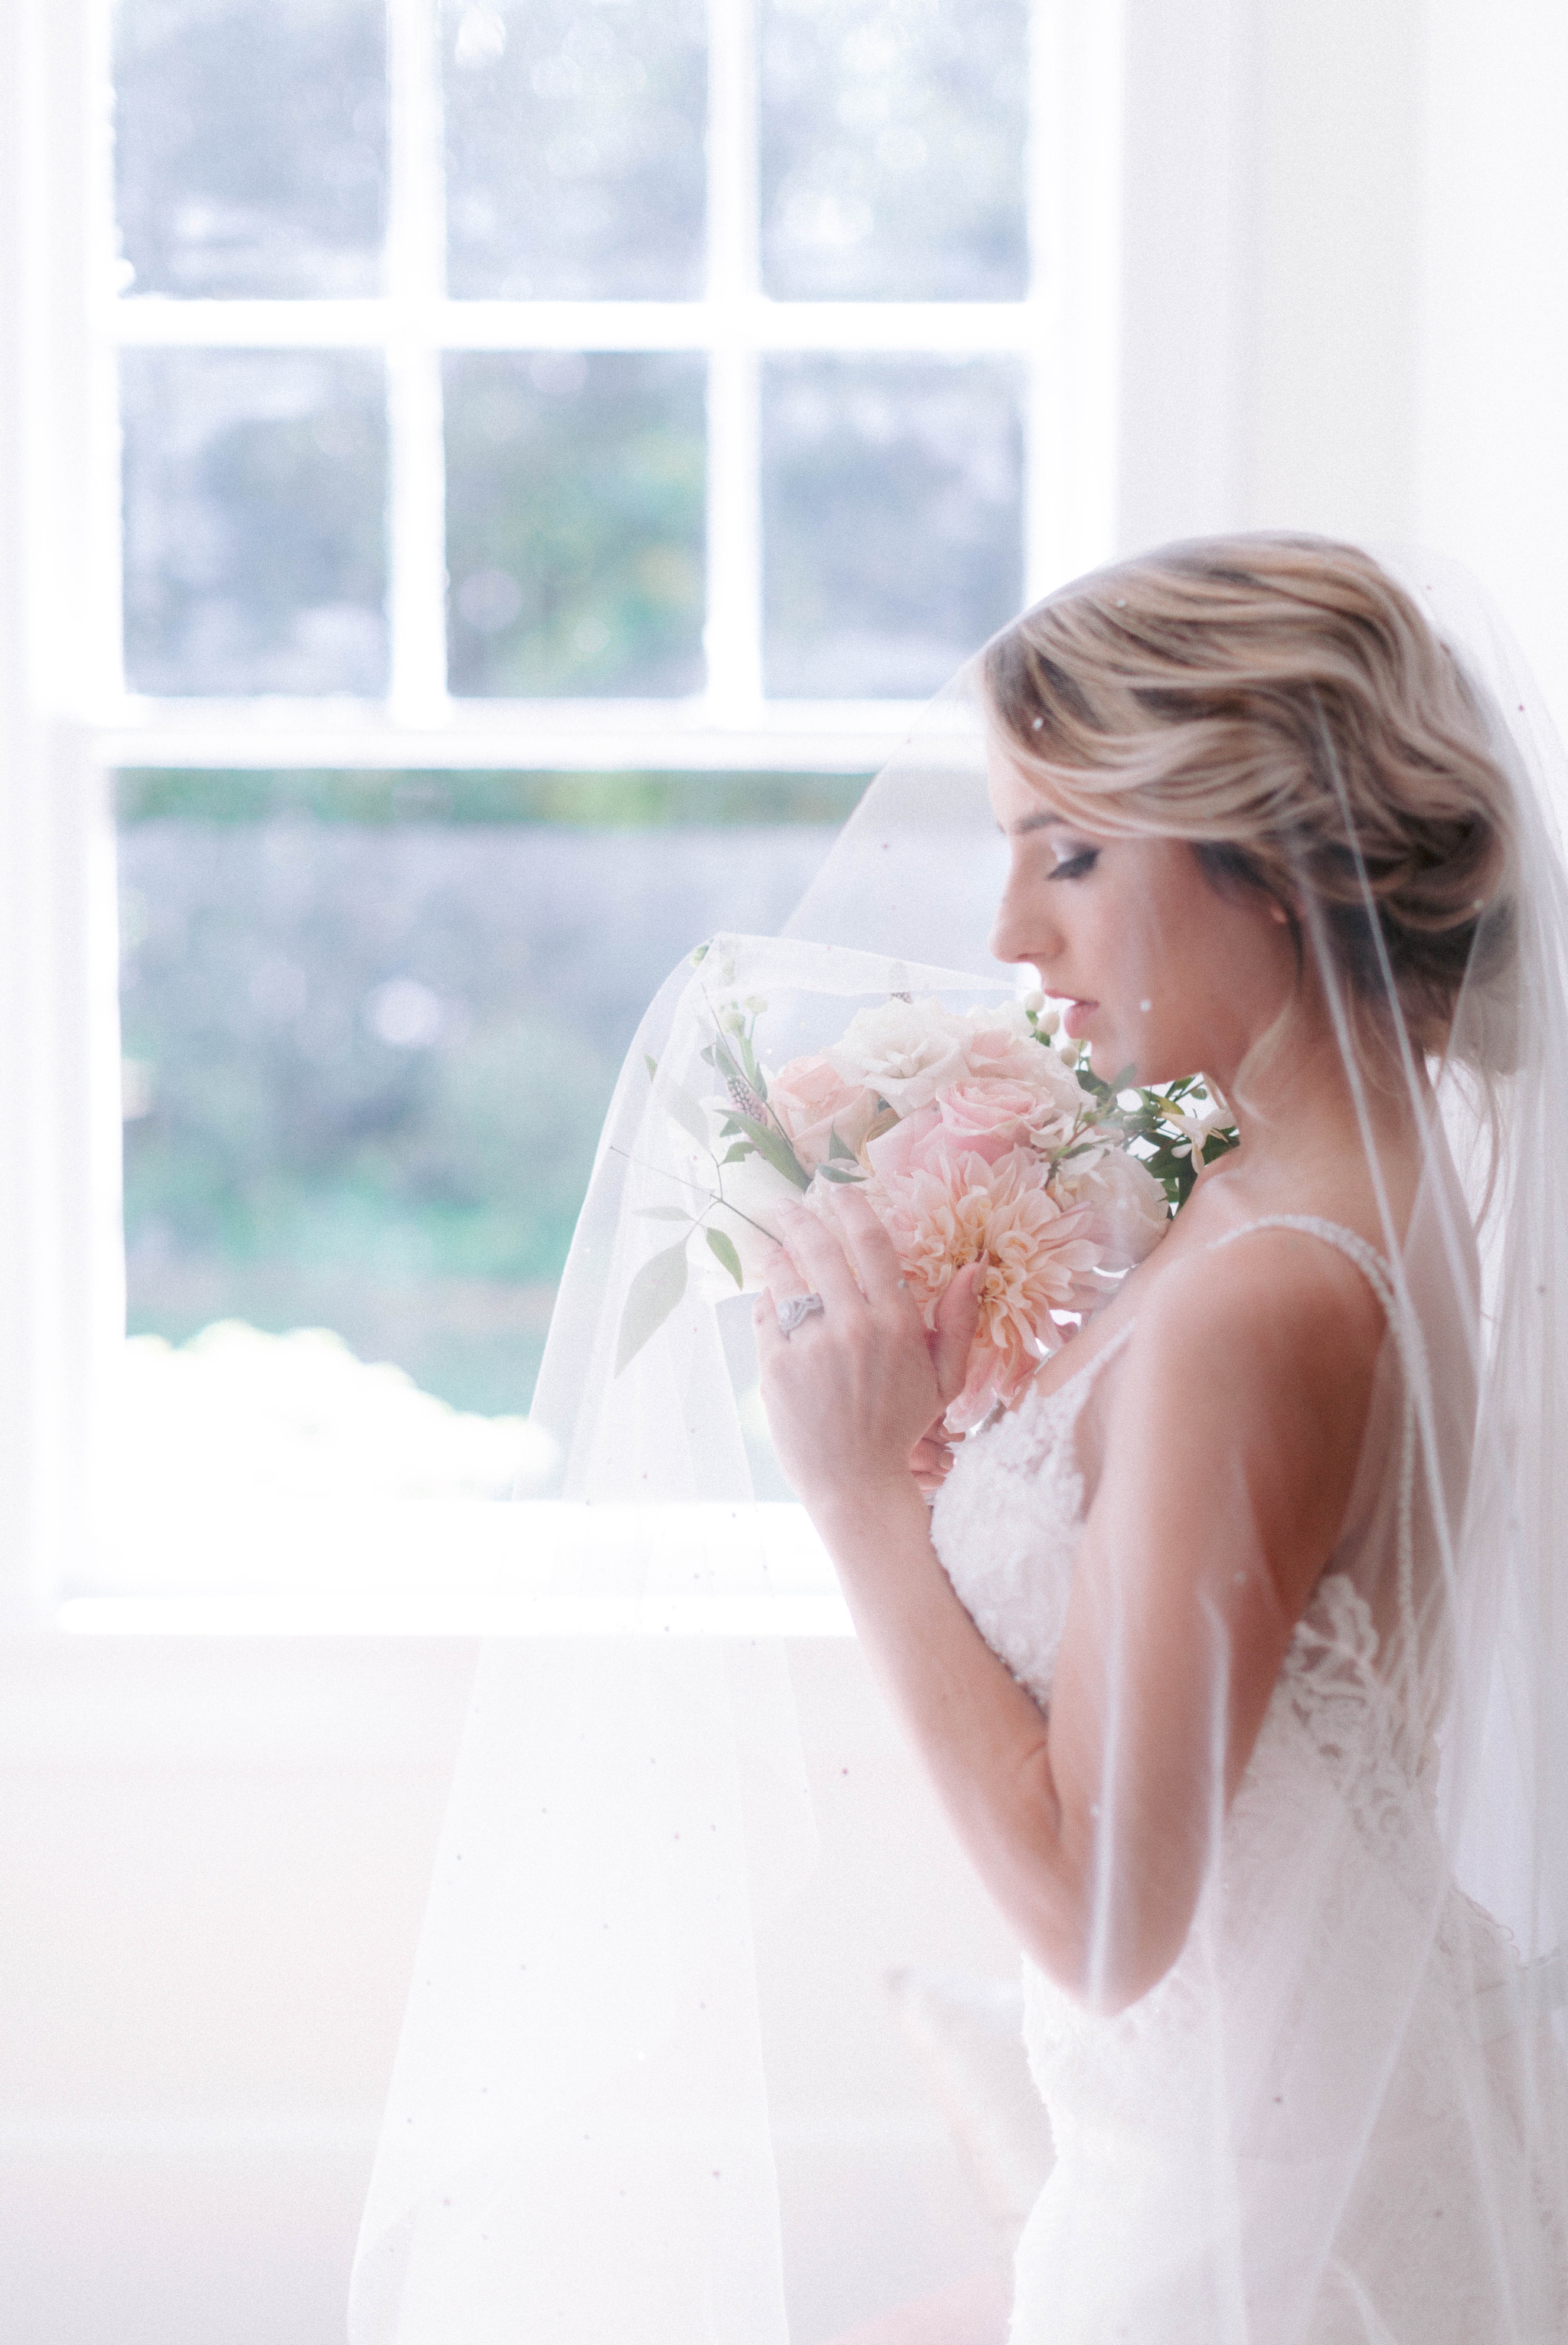  Indoor Natural Light Bridal Portraits by a window with a white backdrop - classic bride with pastel colors - wedding gown by Stella York - Honolulu, Oahu, Hawaii Wedding Photographer 